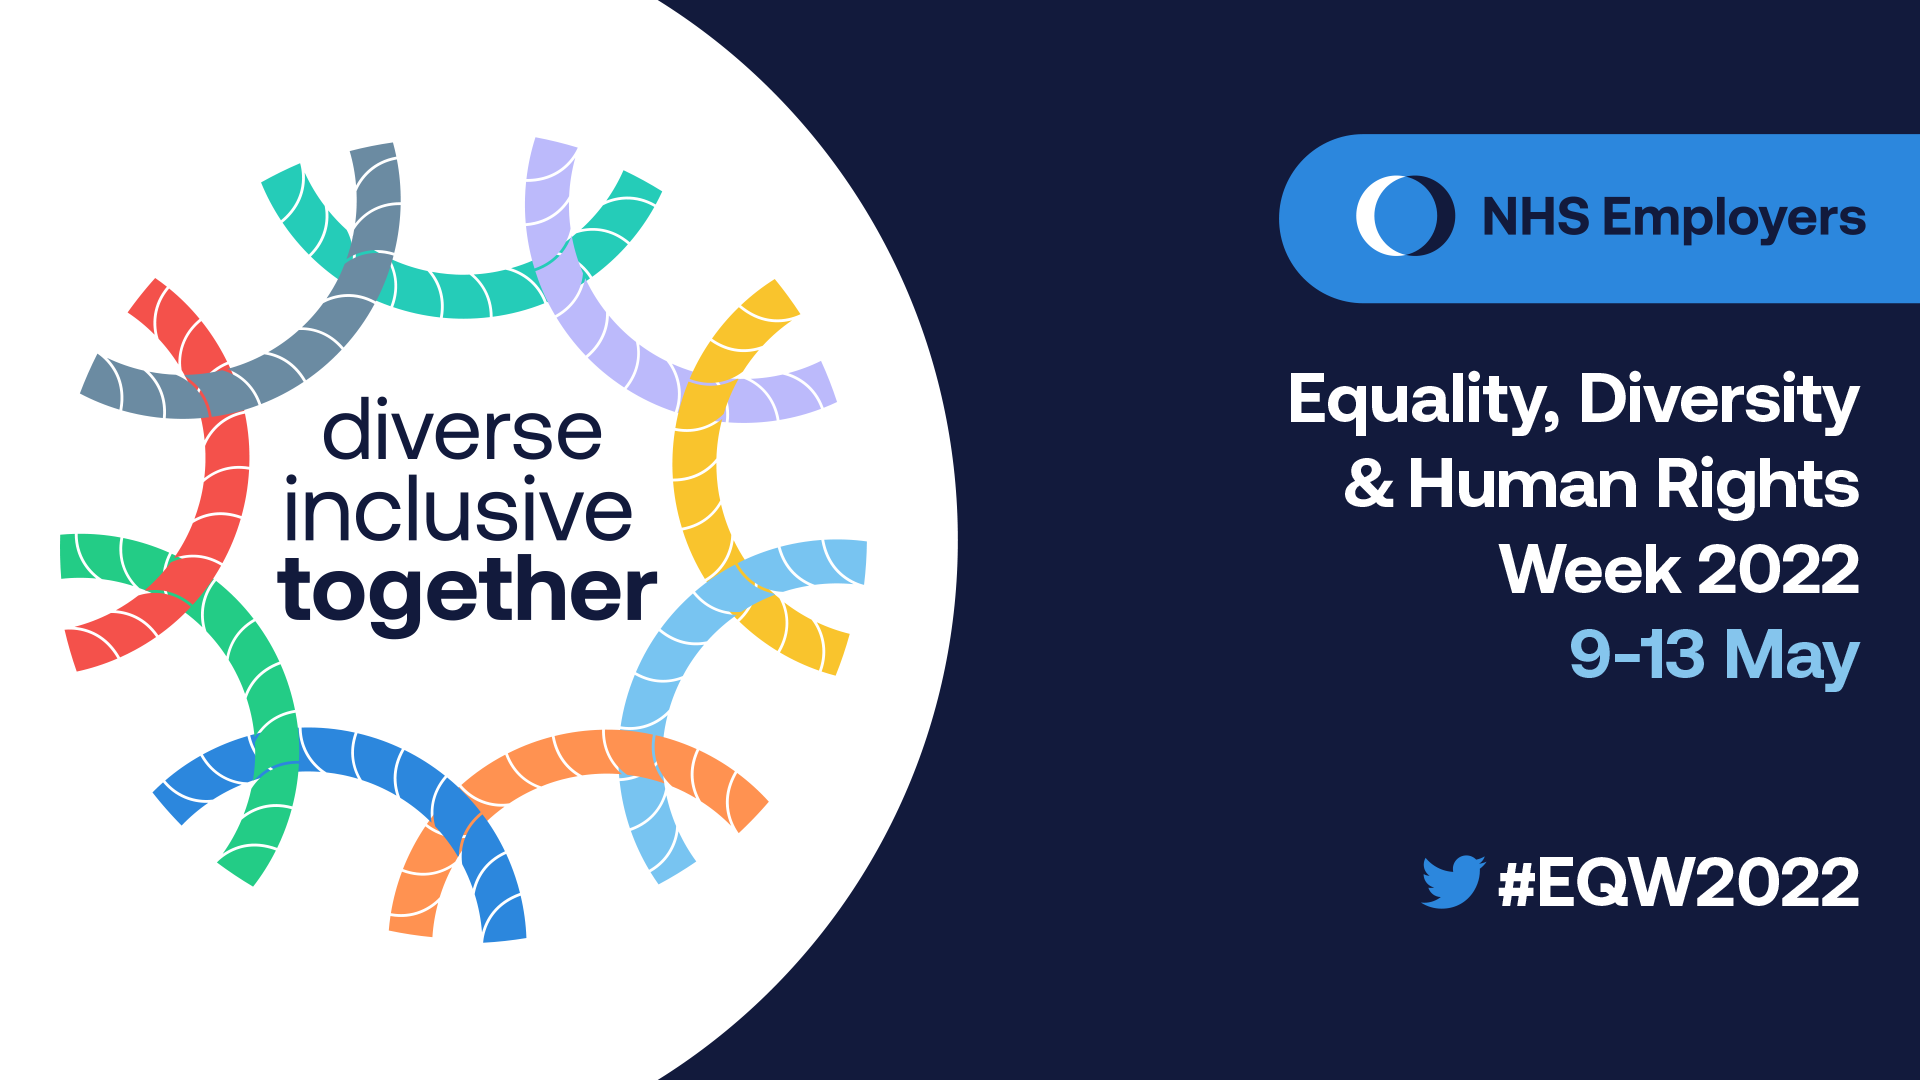 benefits of equality and diversity in health and social care